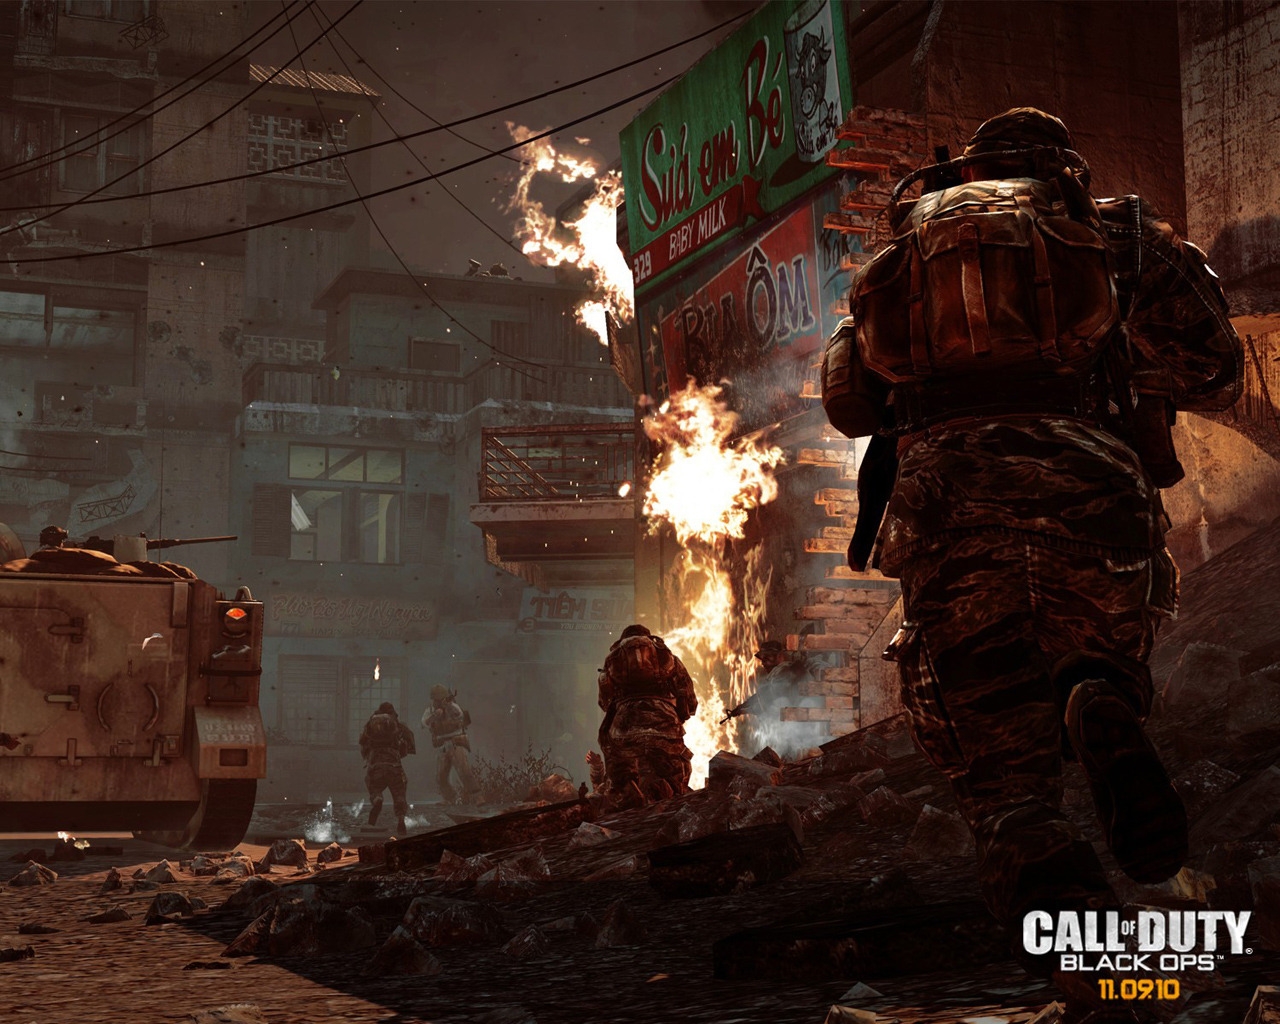 Call of Duty Black Ops Attack for 1280 x 1024 resolution